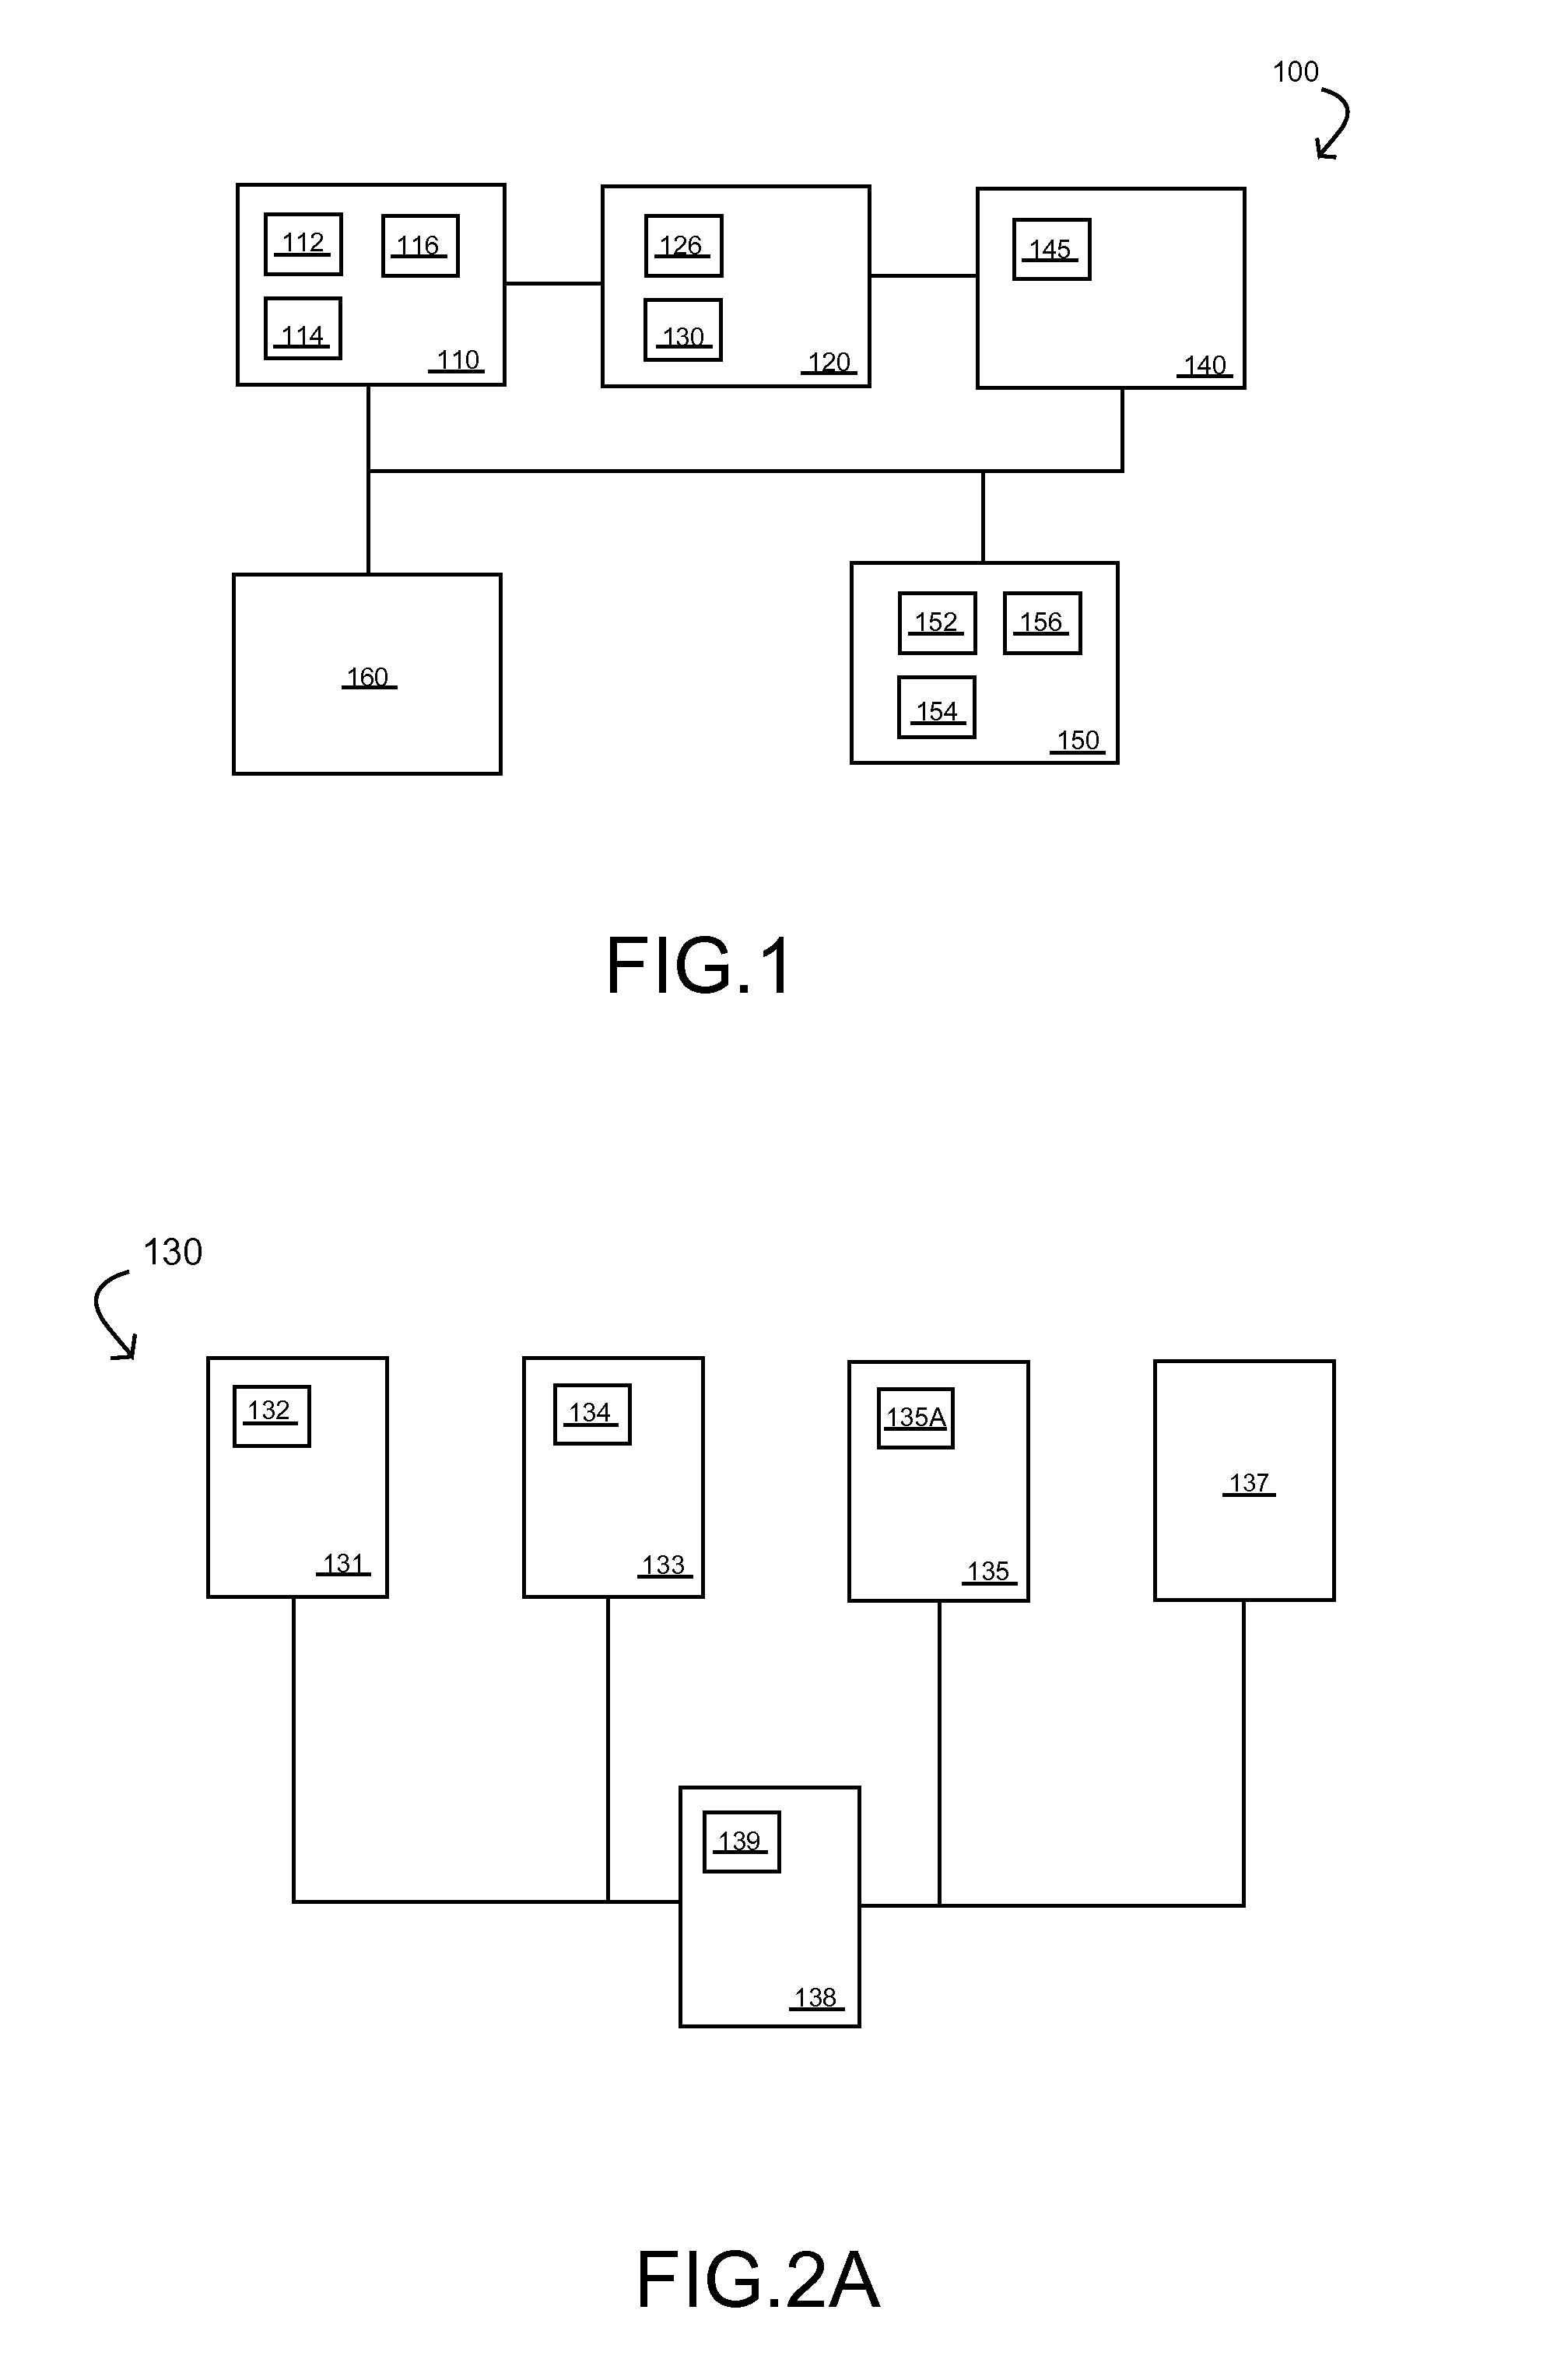 Microfluid Testing System with a Multiple-Channel Disc and Utility thereof